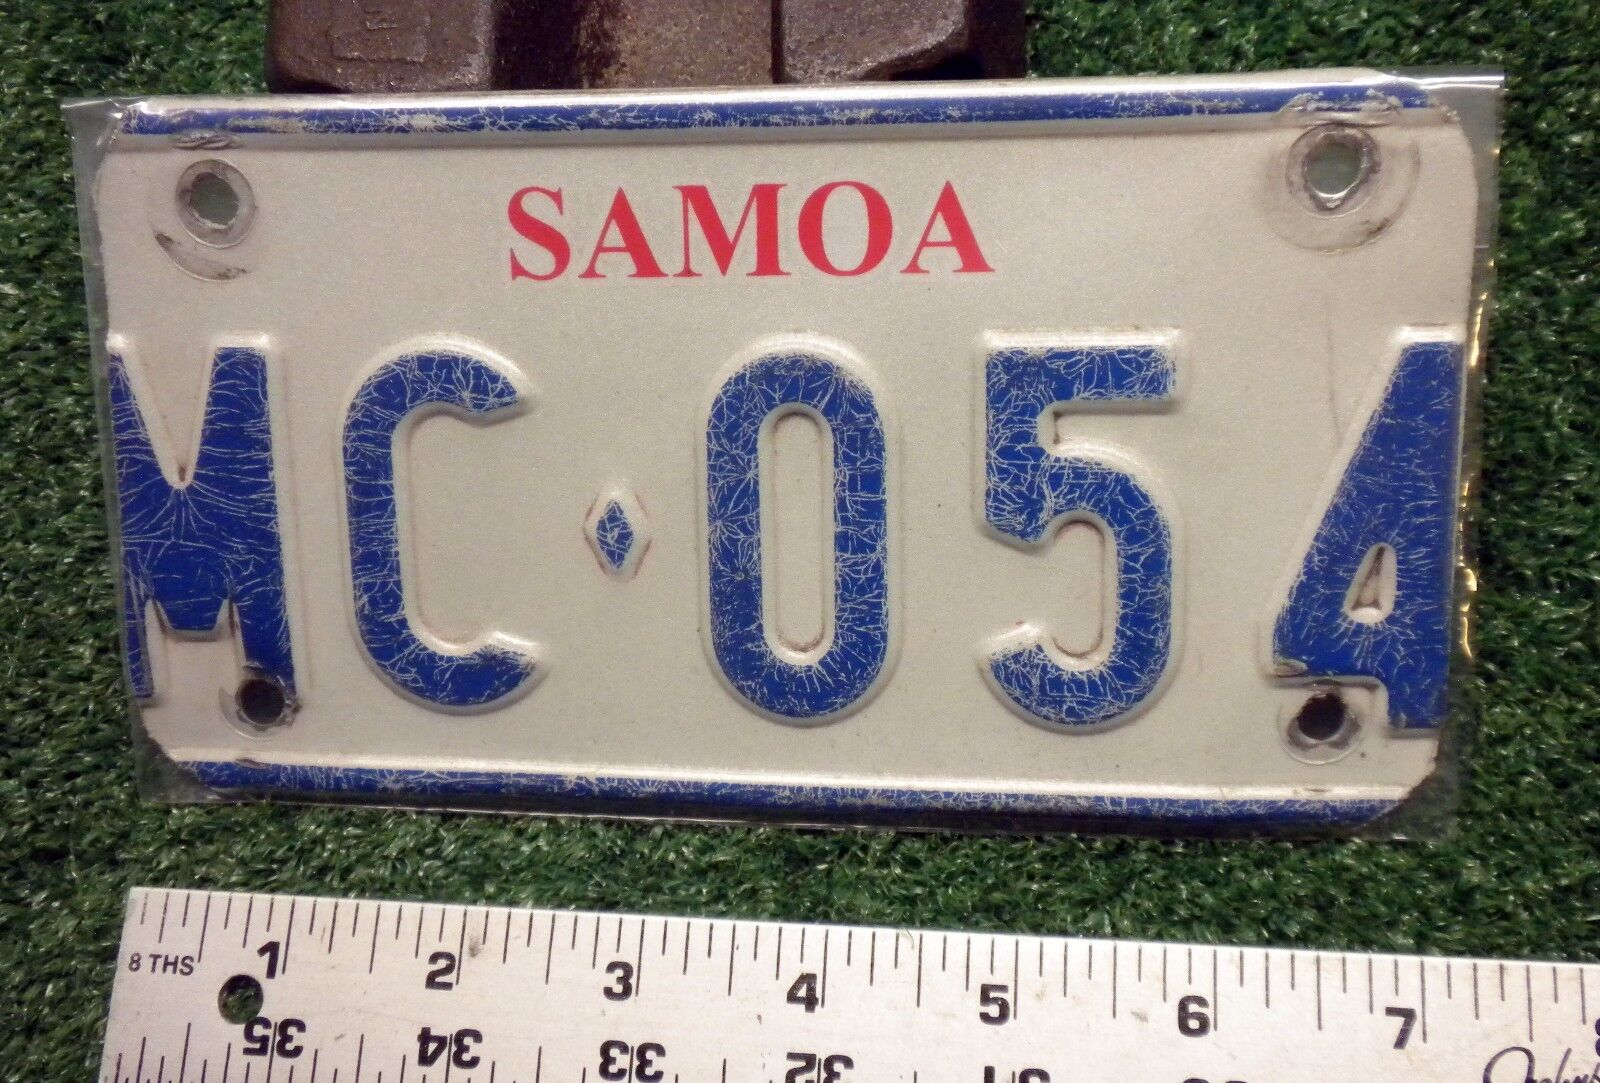 MOTORCYCLE - SAMOA (Western) - LICENSE PLATE - 2000, great used example - TOUGH